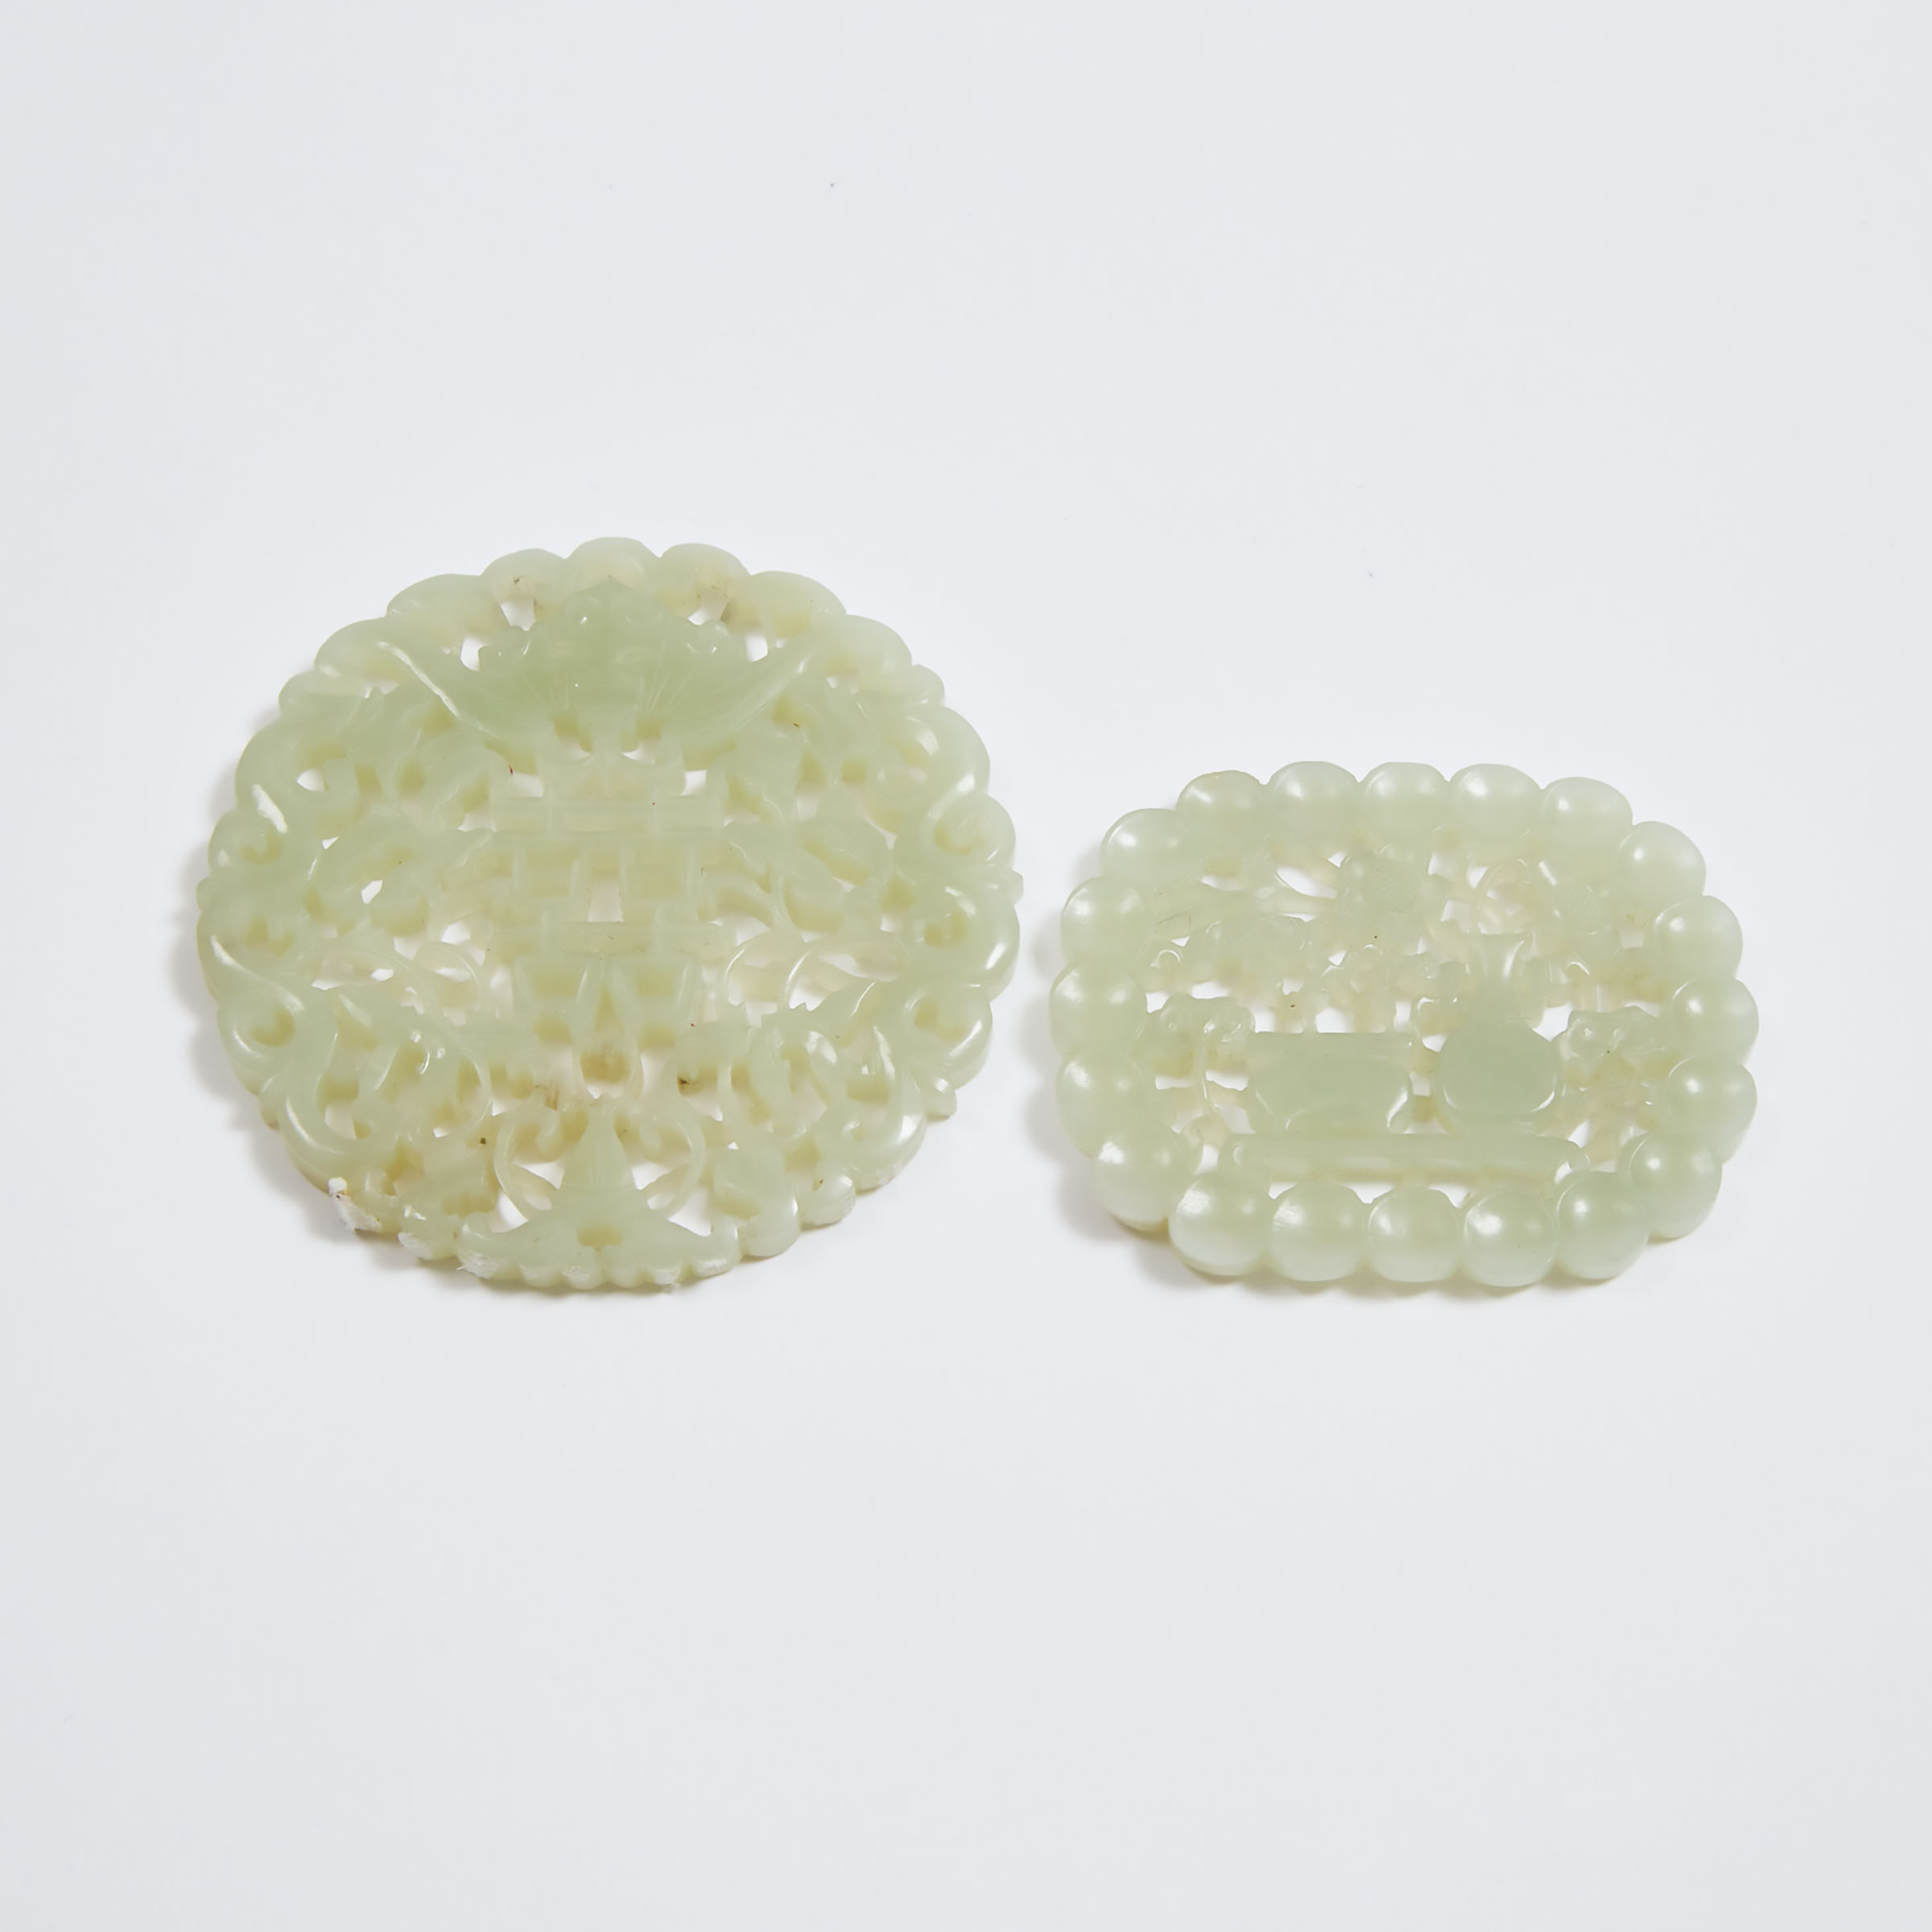 Two White Jade Reticulated Plaques, Qing Dynasty, 19th Century